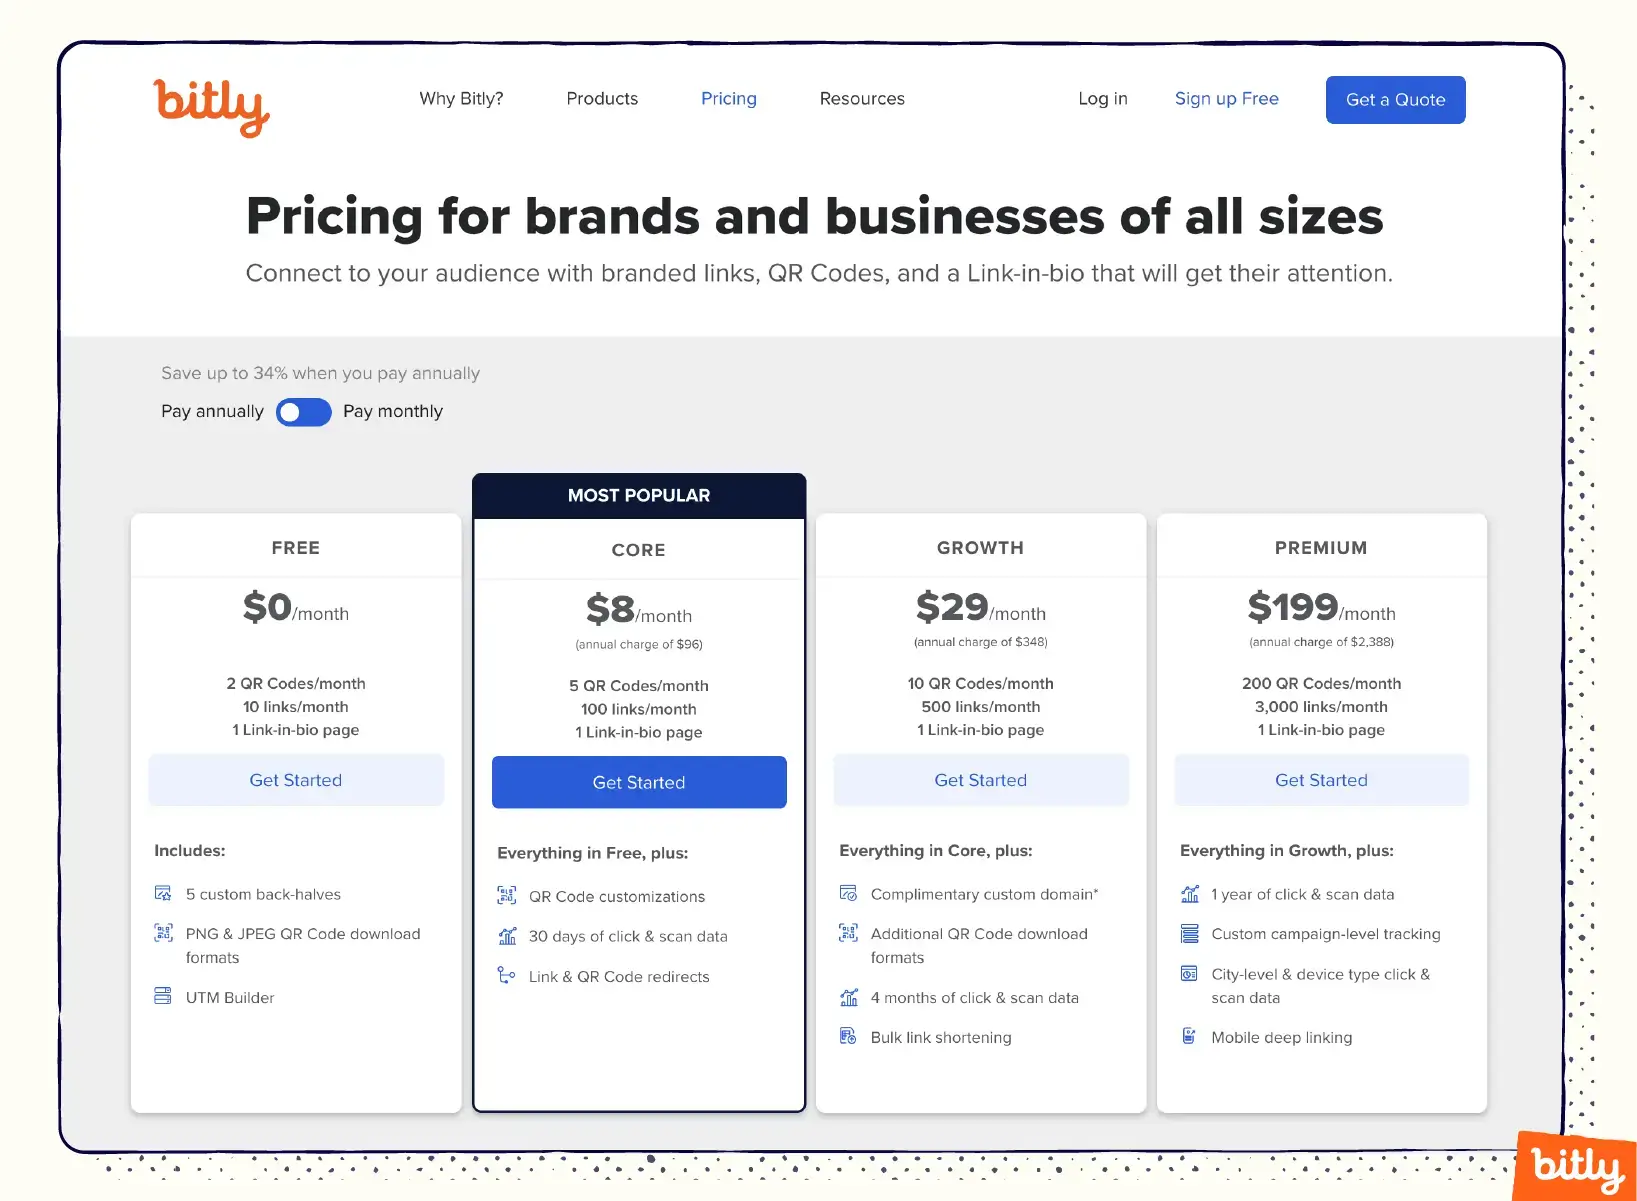 Bitly pricing information for the Free, Core, Growth, and Premium plans